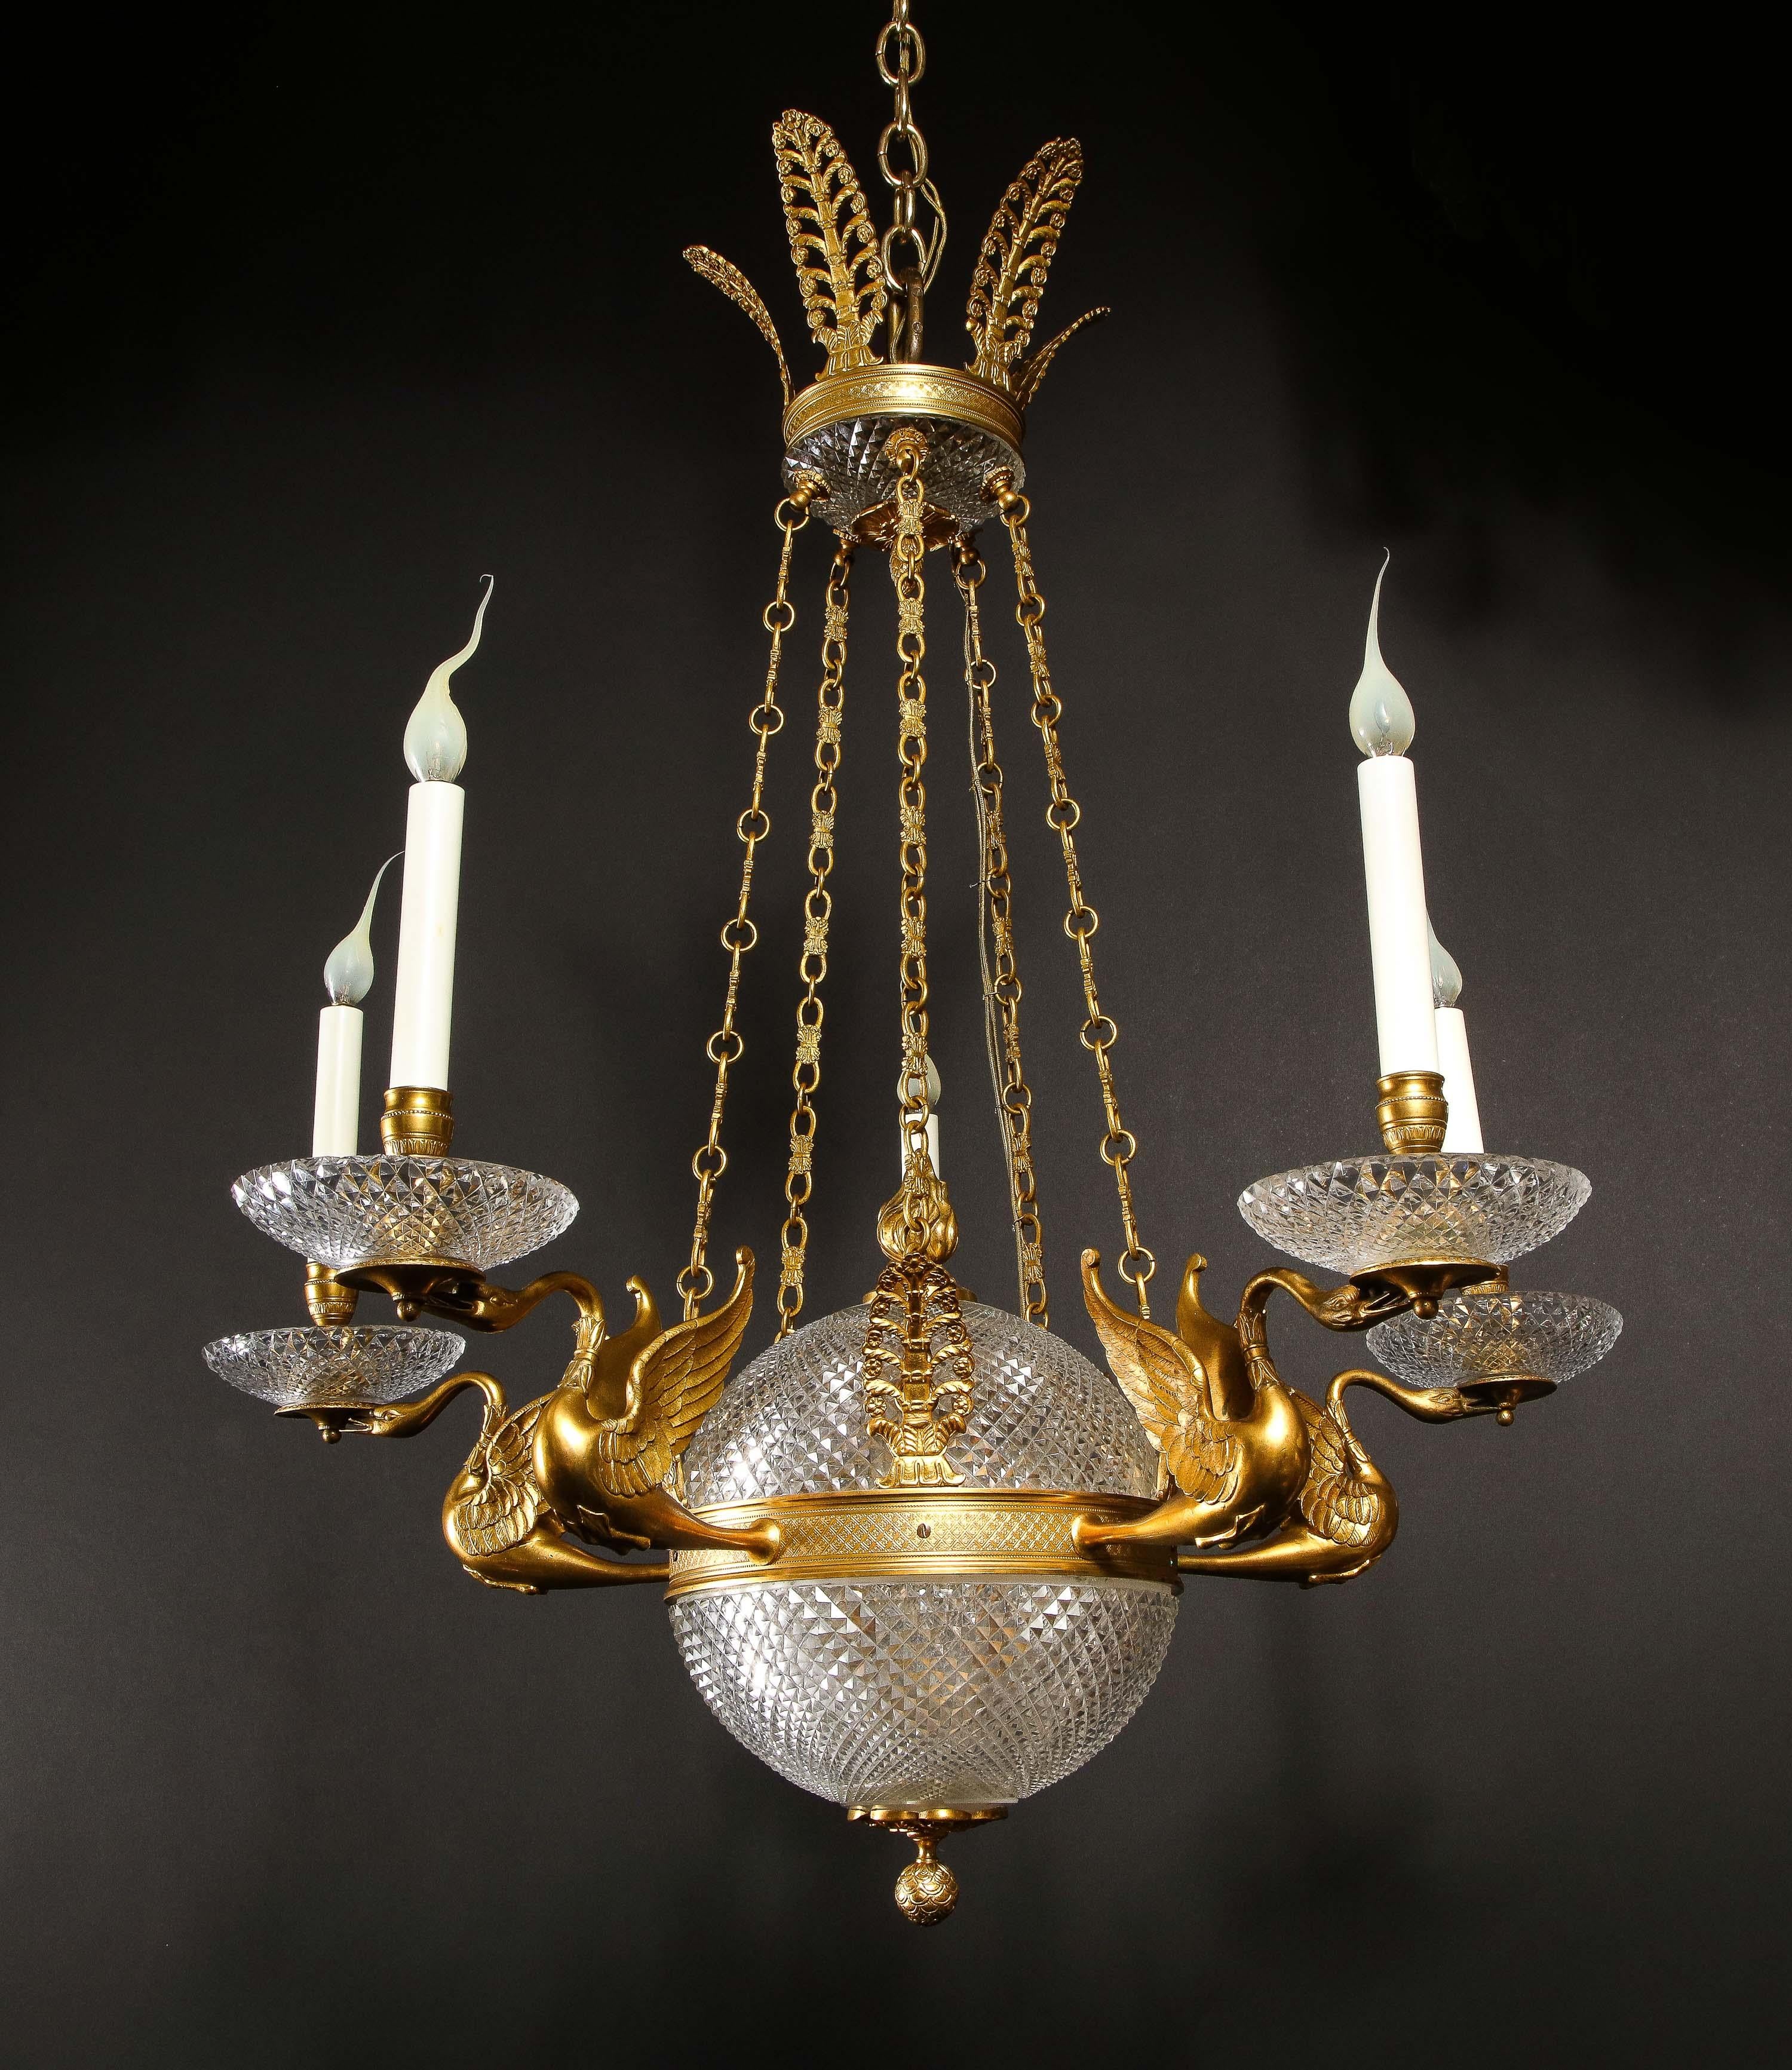 Hollywood Regency Antique French Ball Form Gilt Bronze and Crystal Chandelier For Sale 1